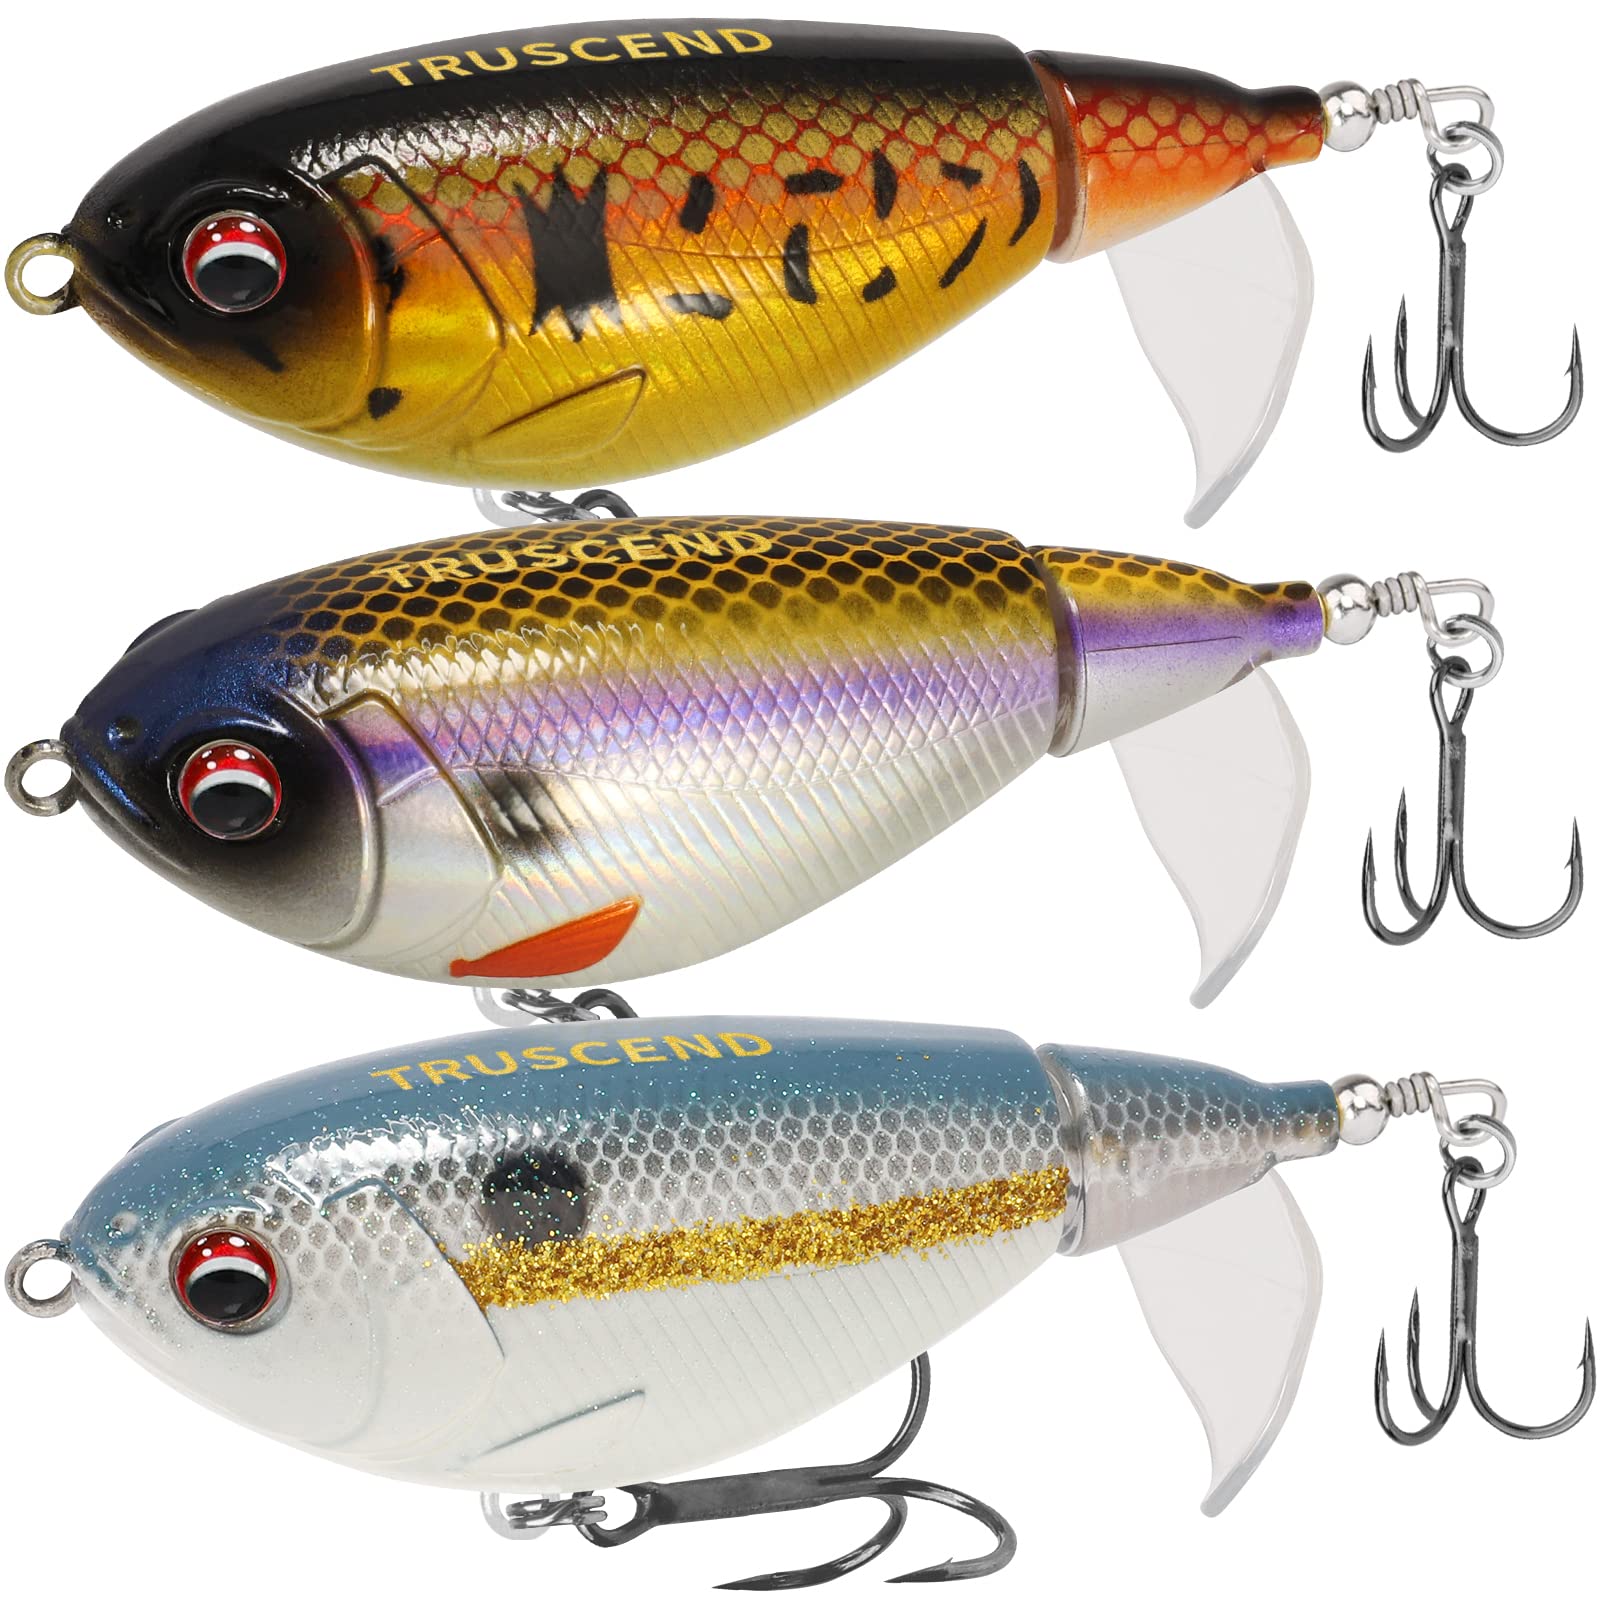 TRUSCEND Topwater Fishing Lures with BKK Hooks, Pencil Plopper Fishing Lure  for Bass Catfish Pike Perch, Floating Minnow Bass Bait with Propeller Tail, Top  Water Pencil Lures Freshwater or Saltwater A--3.2,0.46oz